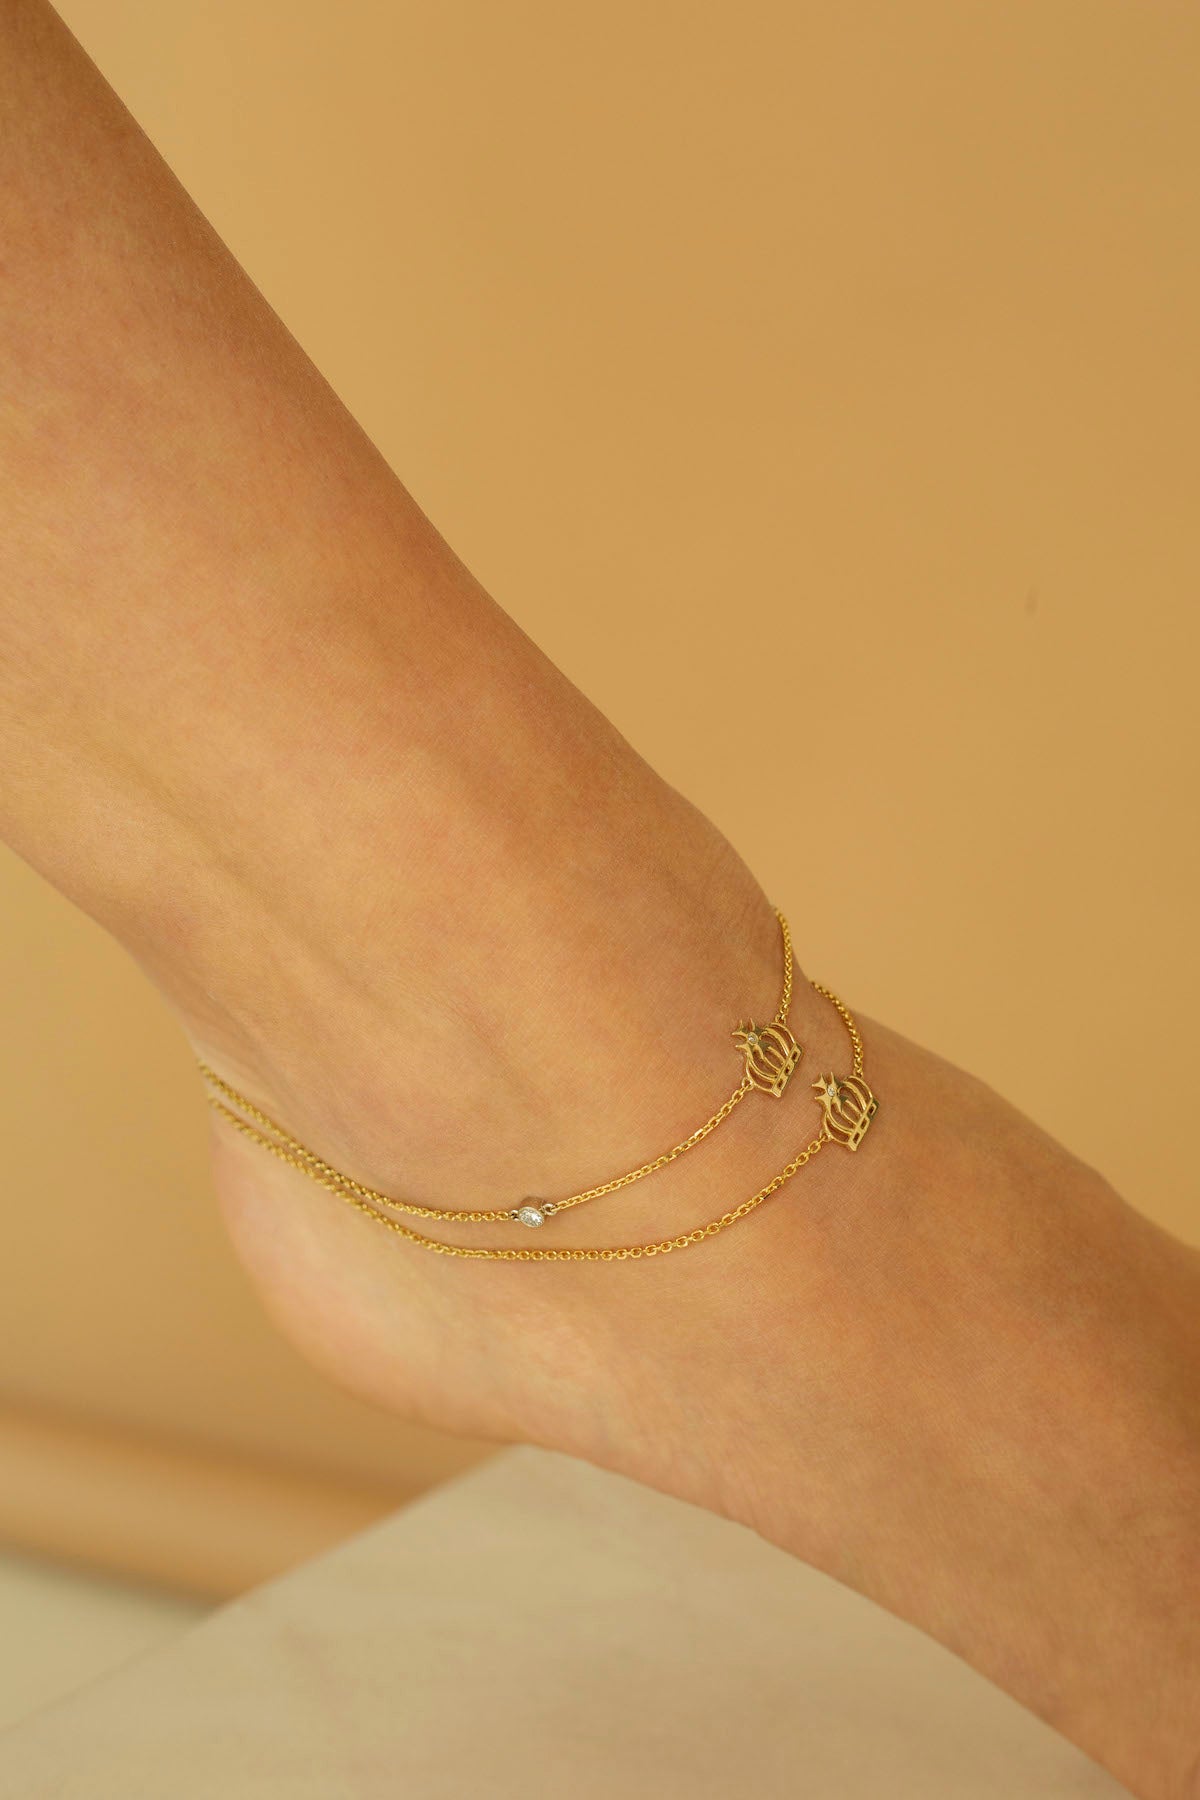 Buy Gold Anklet Dainty Chain Gold, Rose Gold Filled, Sterling Silver, Anklet  Bracelet for Women, Basic Thin Chain, Simple Plain Chain Anklet Online in  India - Etsy